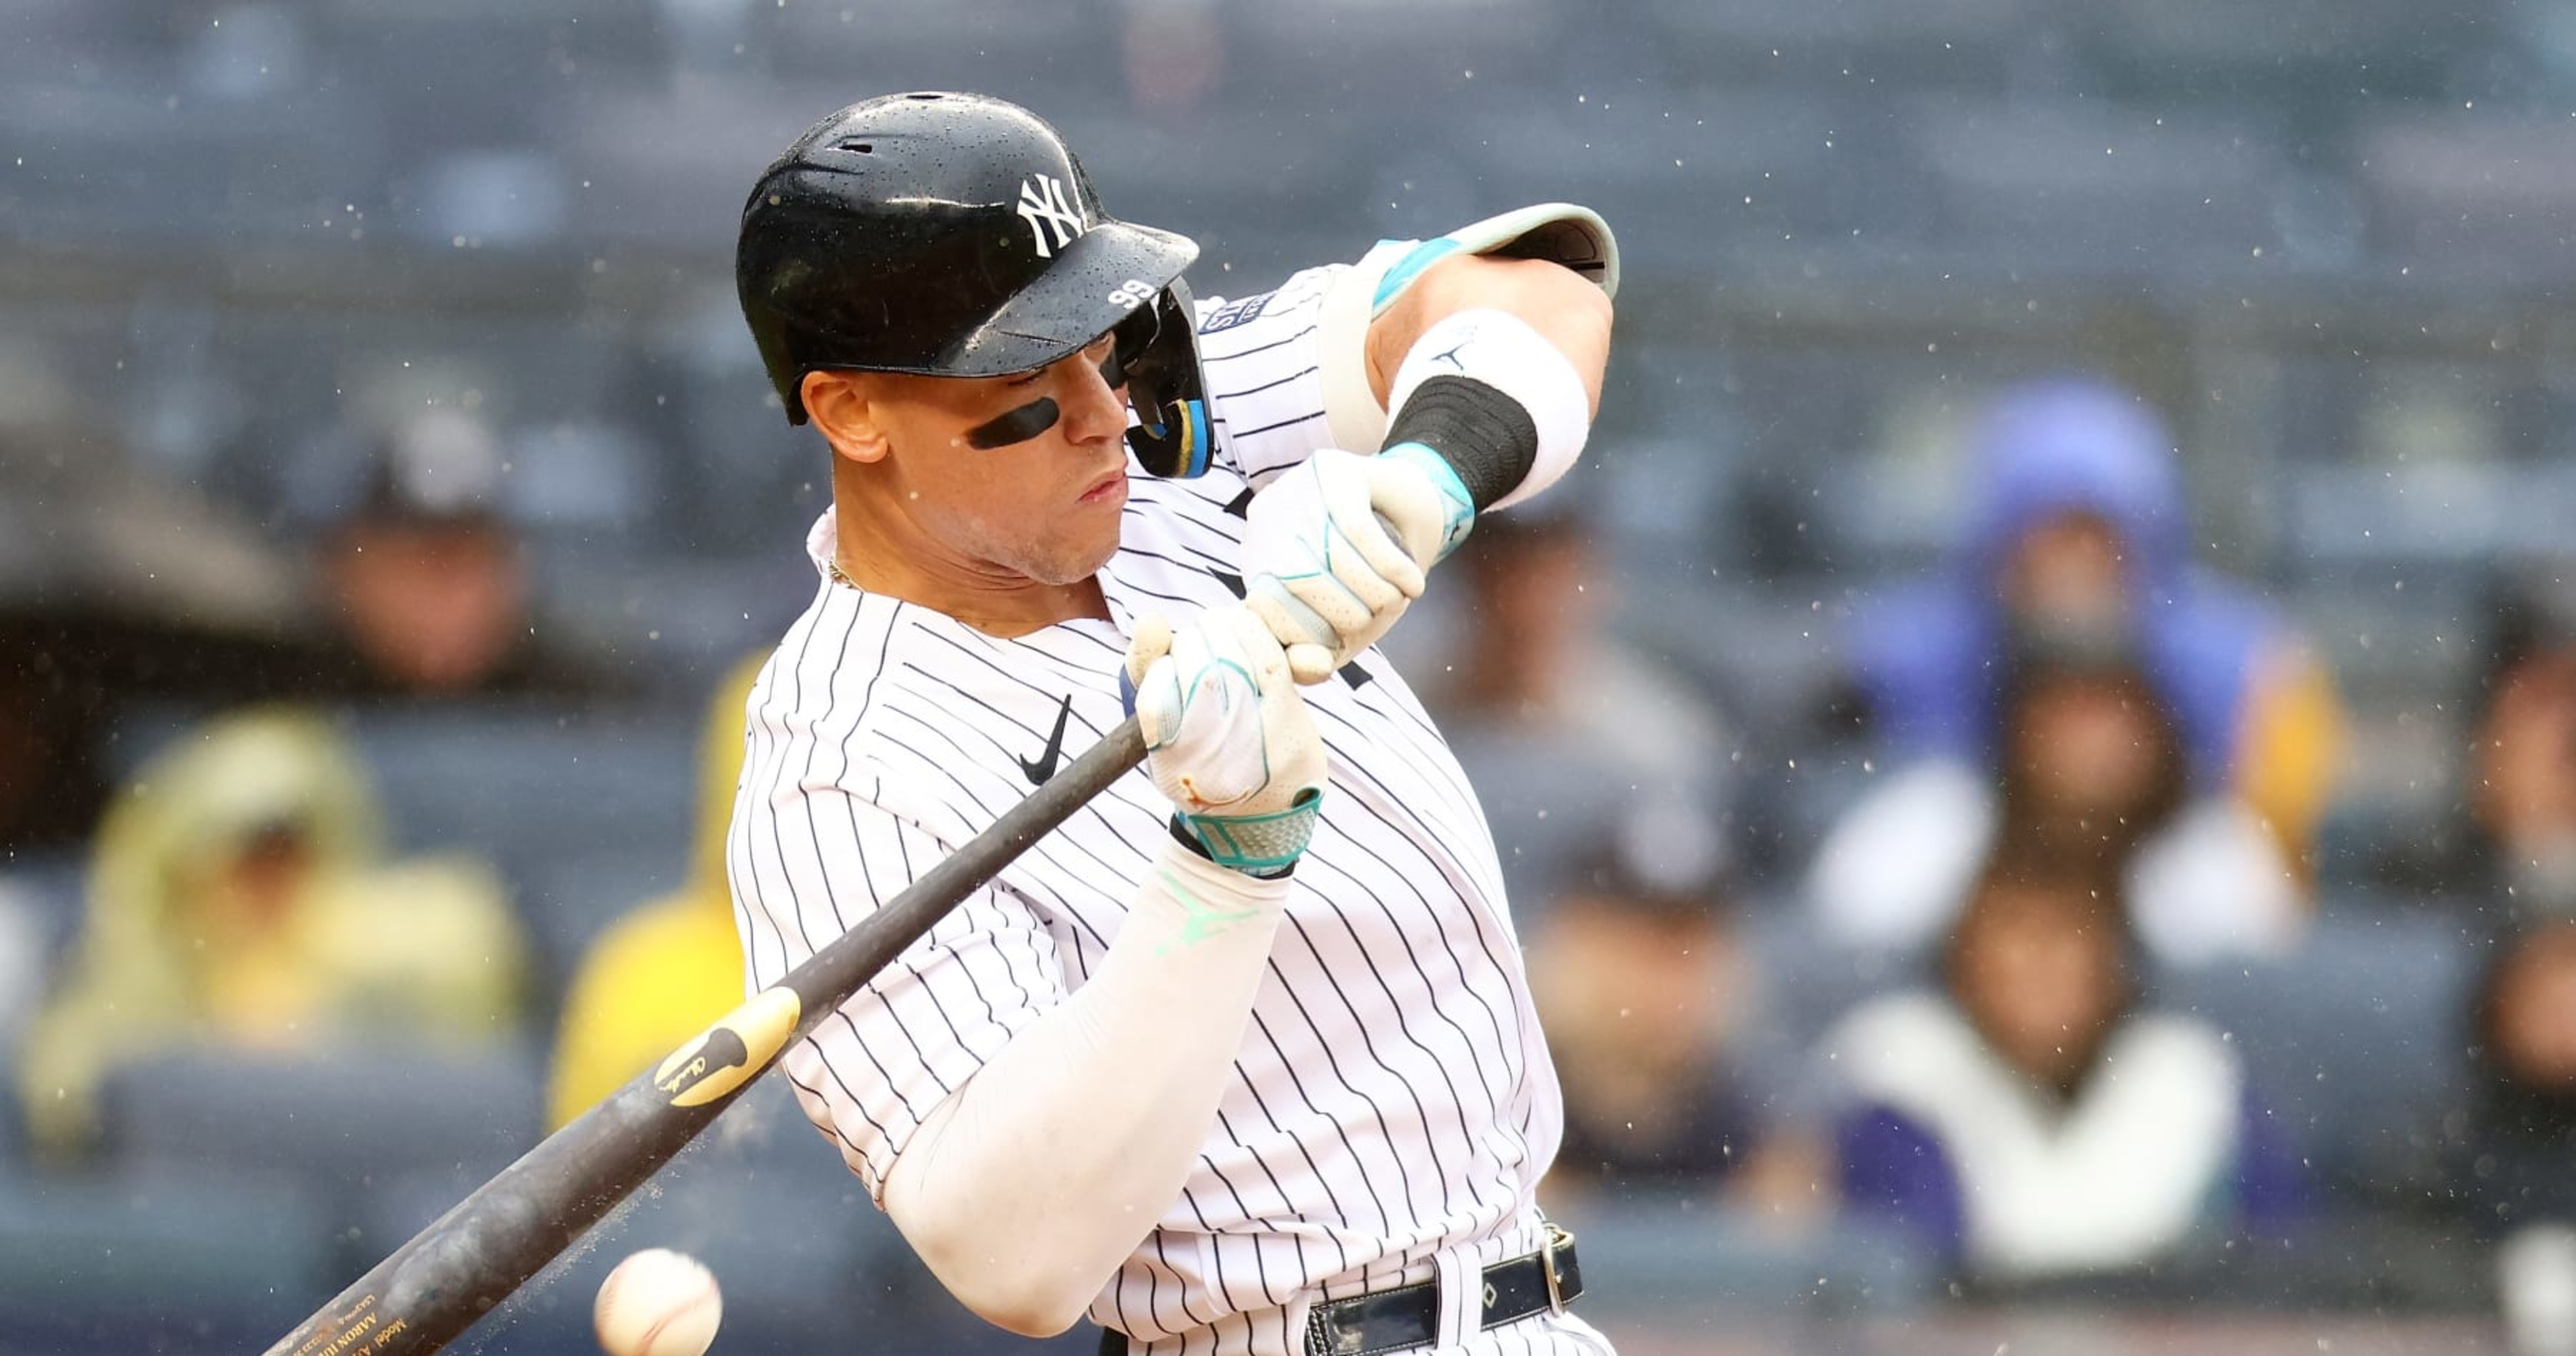 Yankees considering playing Aaron Judge in a new position